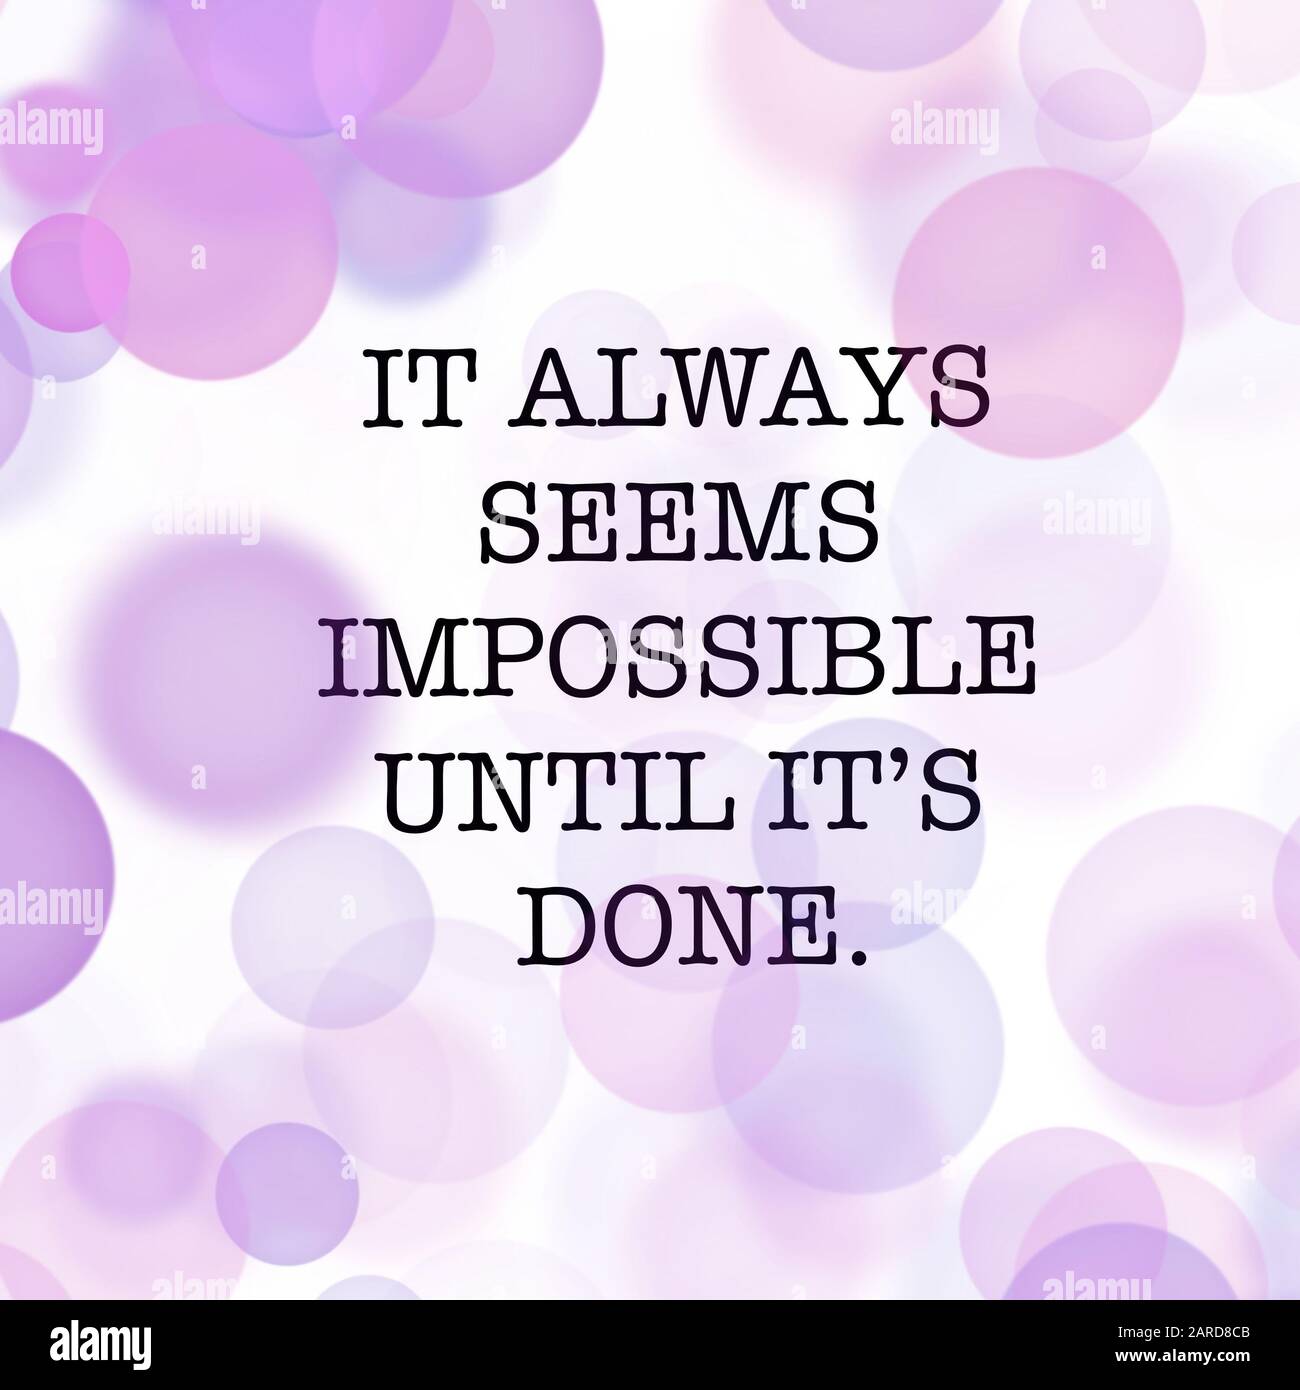 Inspirational Quote - it always seems impossible until it's done with White  and purple background Stock Photo - Alamy